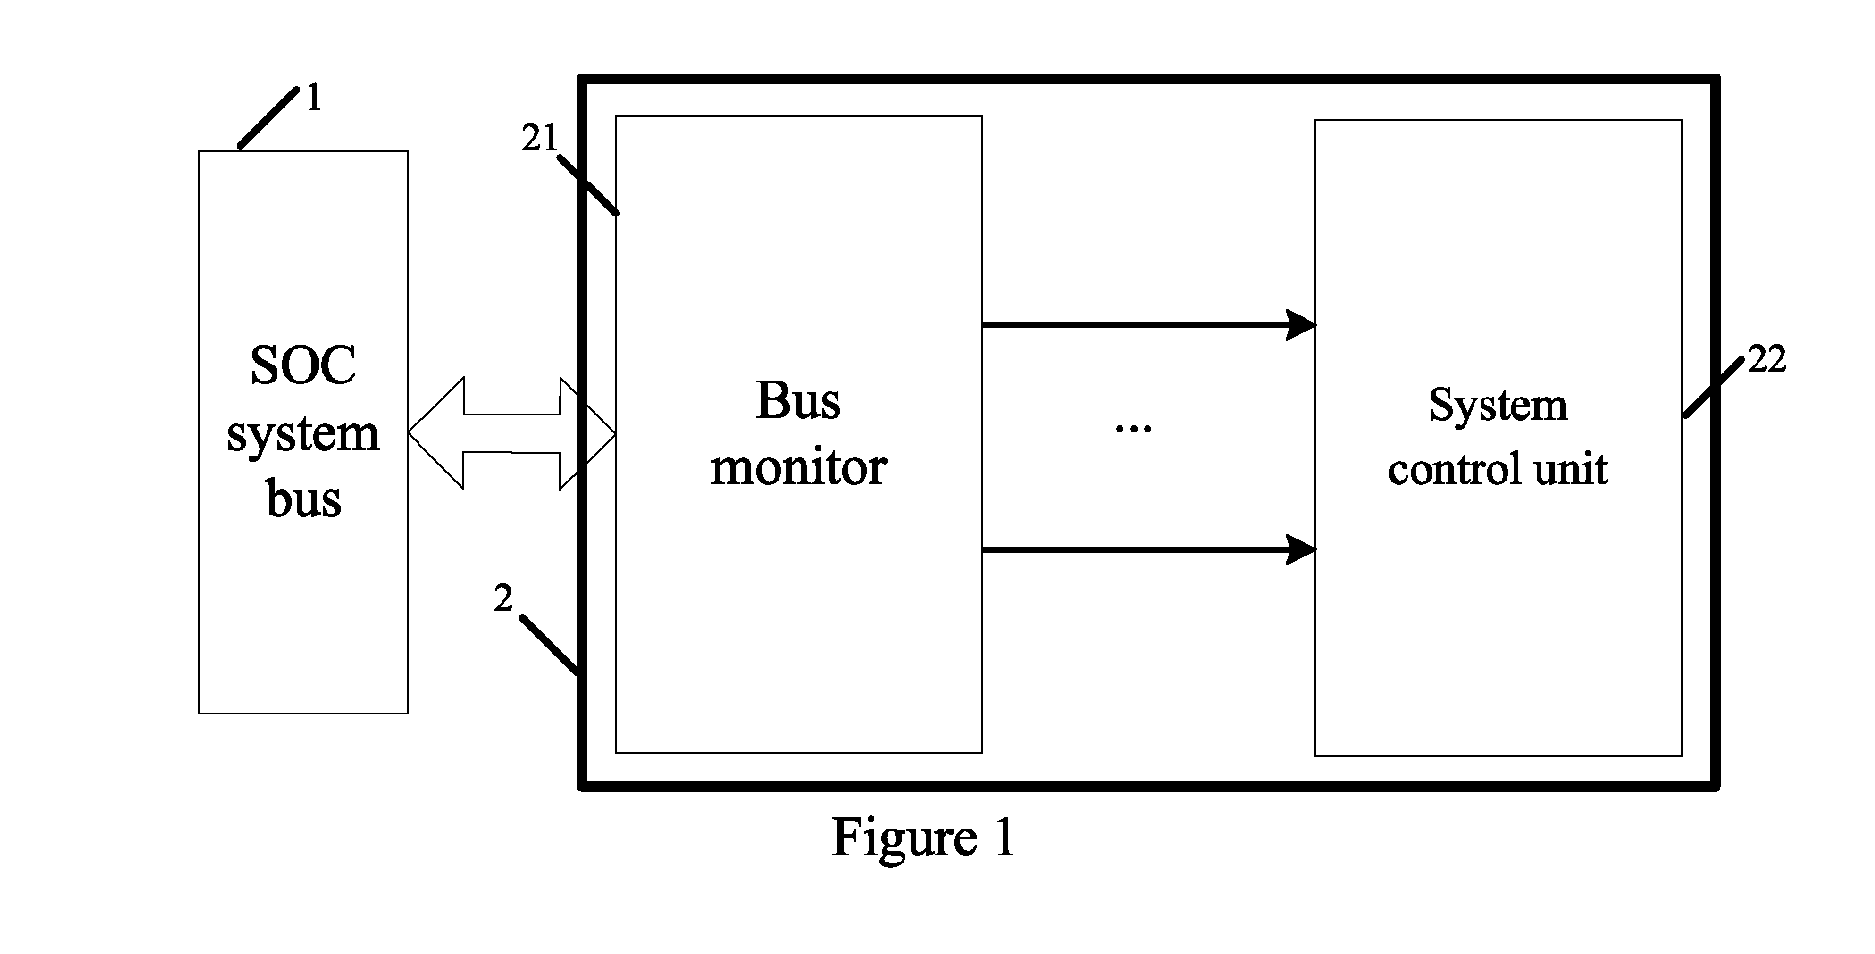 Bus monitor for enhancing SOC system security and realization method thereof